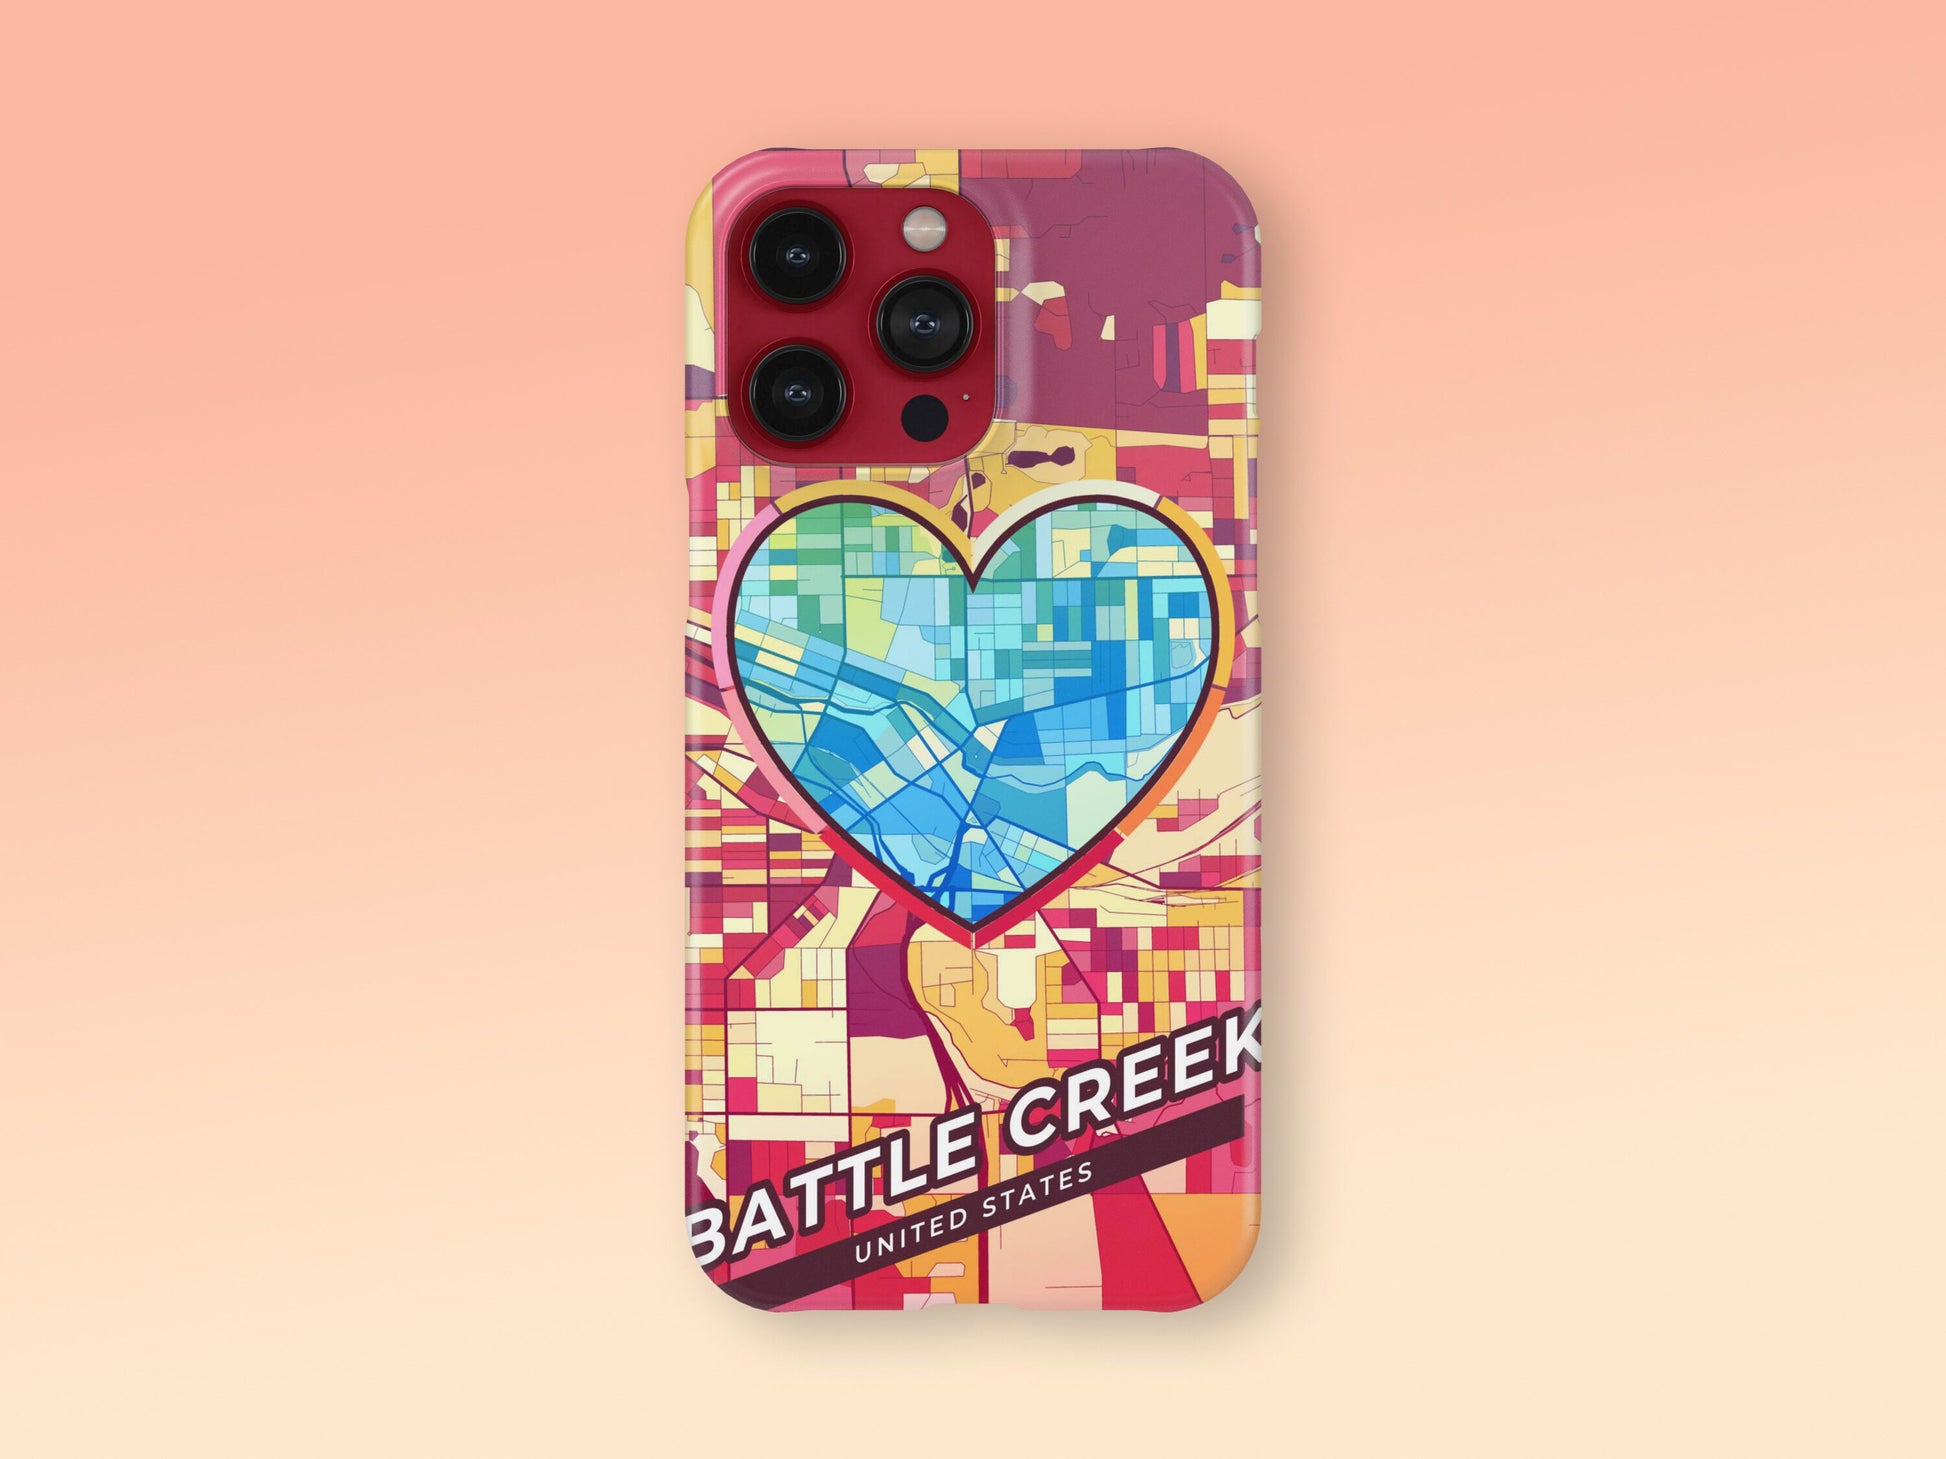 Battle Creek Michigan slim phone case with colorful icon. Birthday, wedding or housewarming gift. Couple match cases. 2